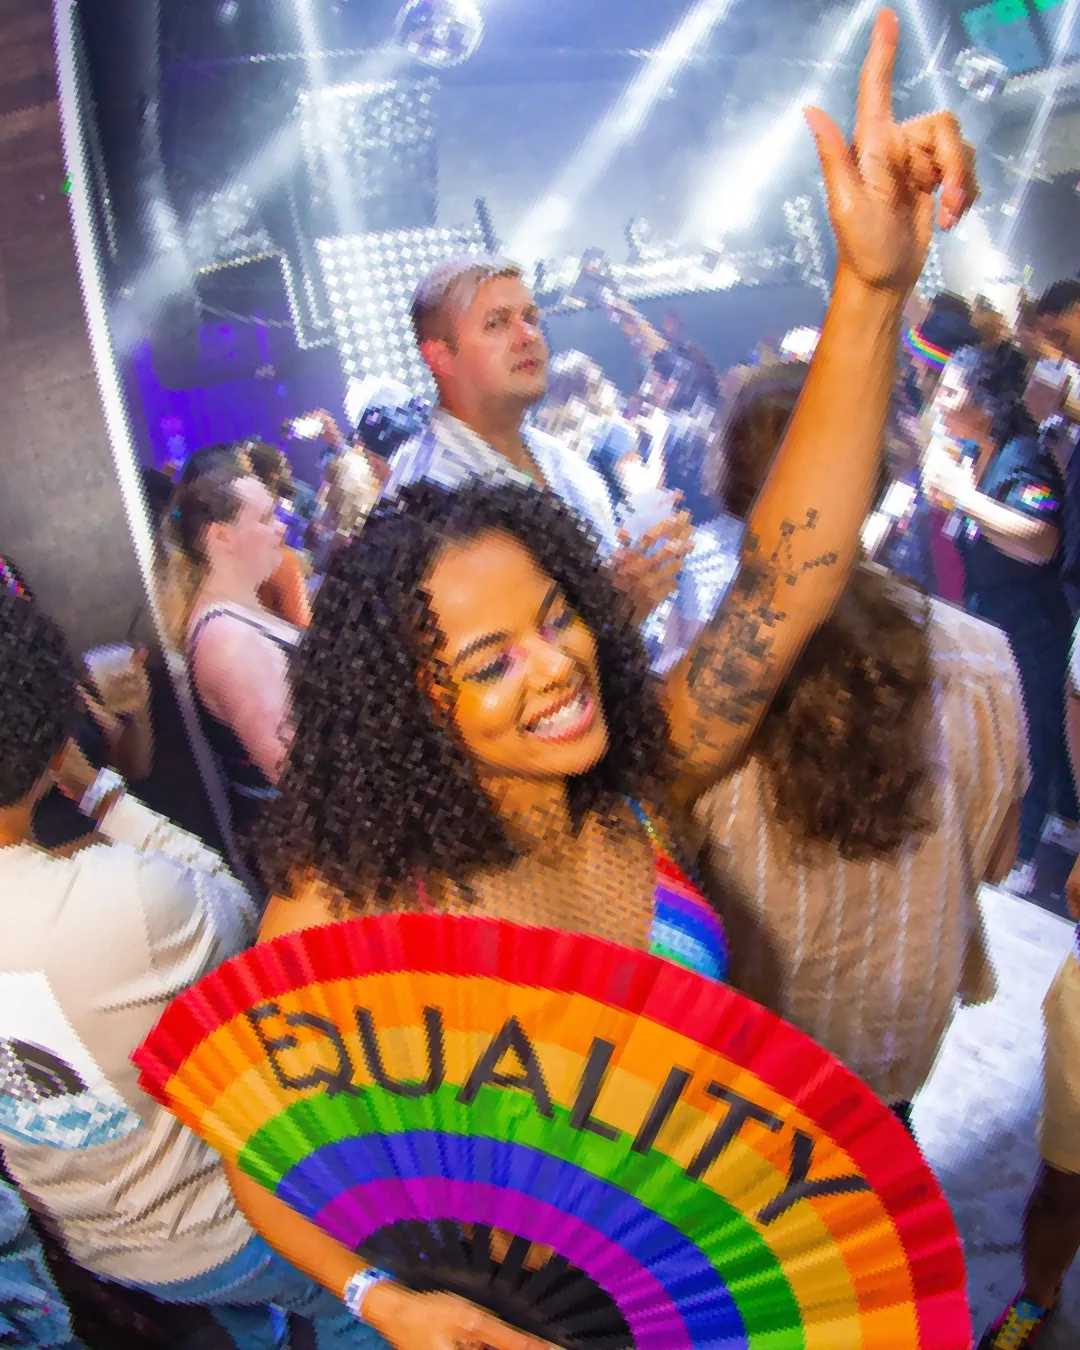 Girl holding up an equality fan showing her support during the Pride Bar Crawl